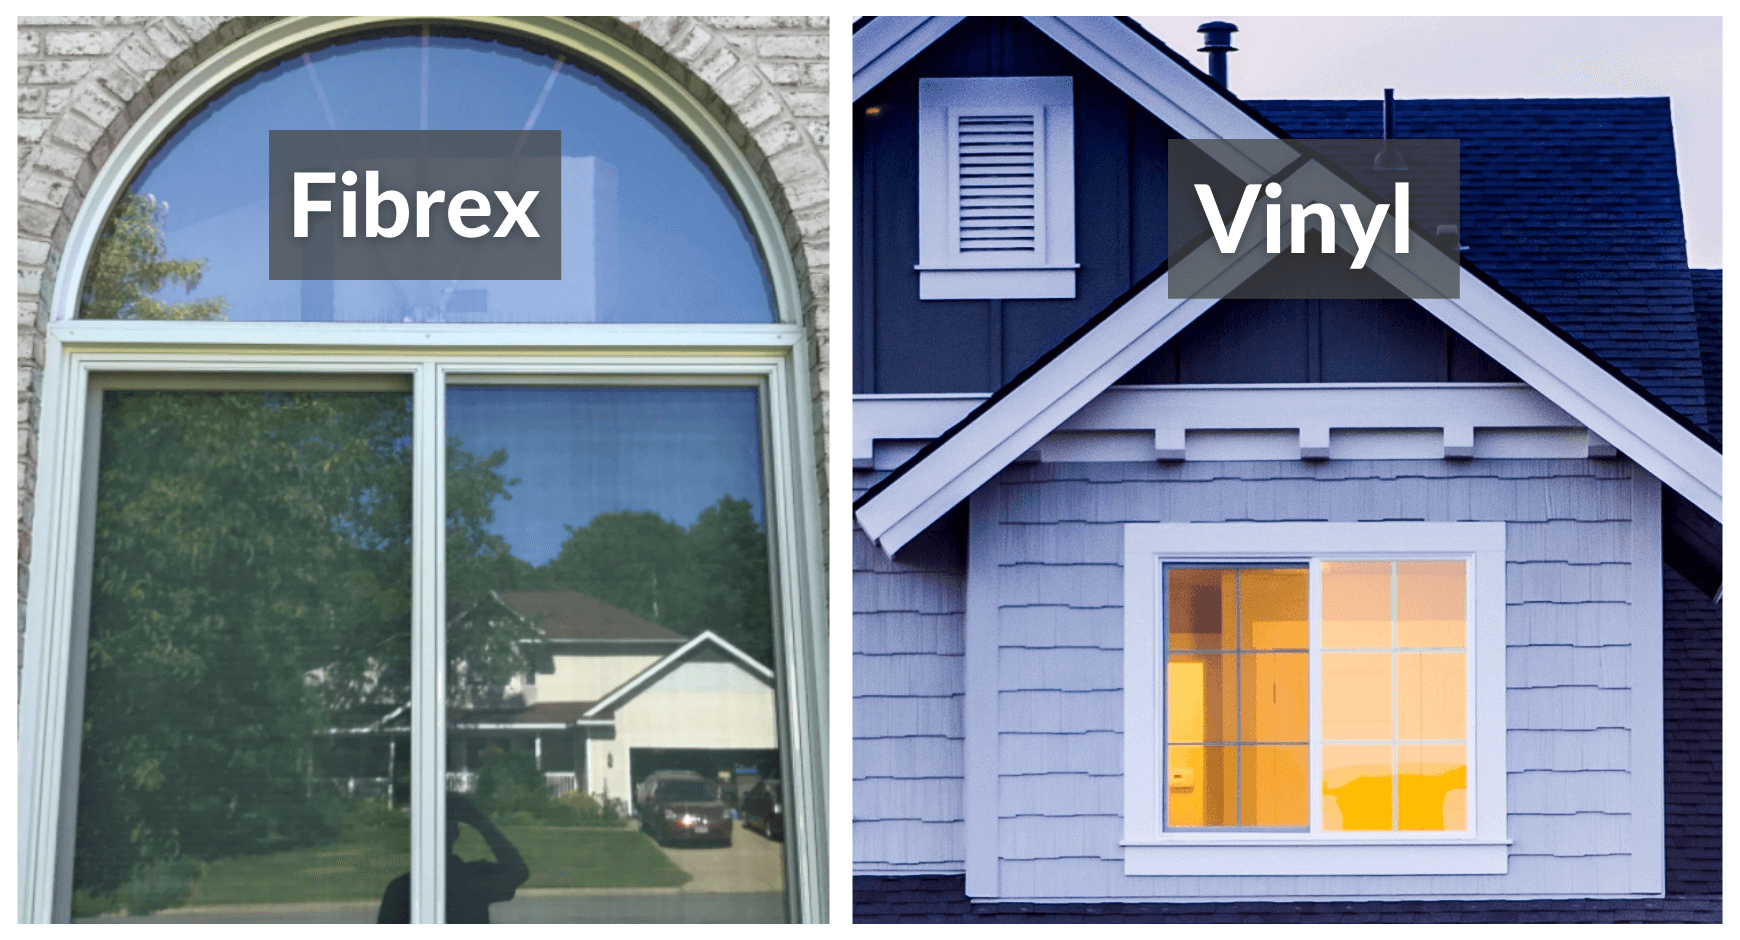 Side by side comparison of Fibrex and Vinyl